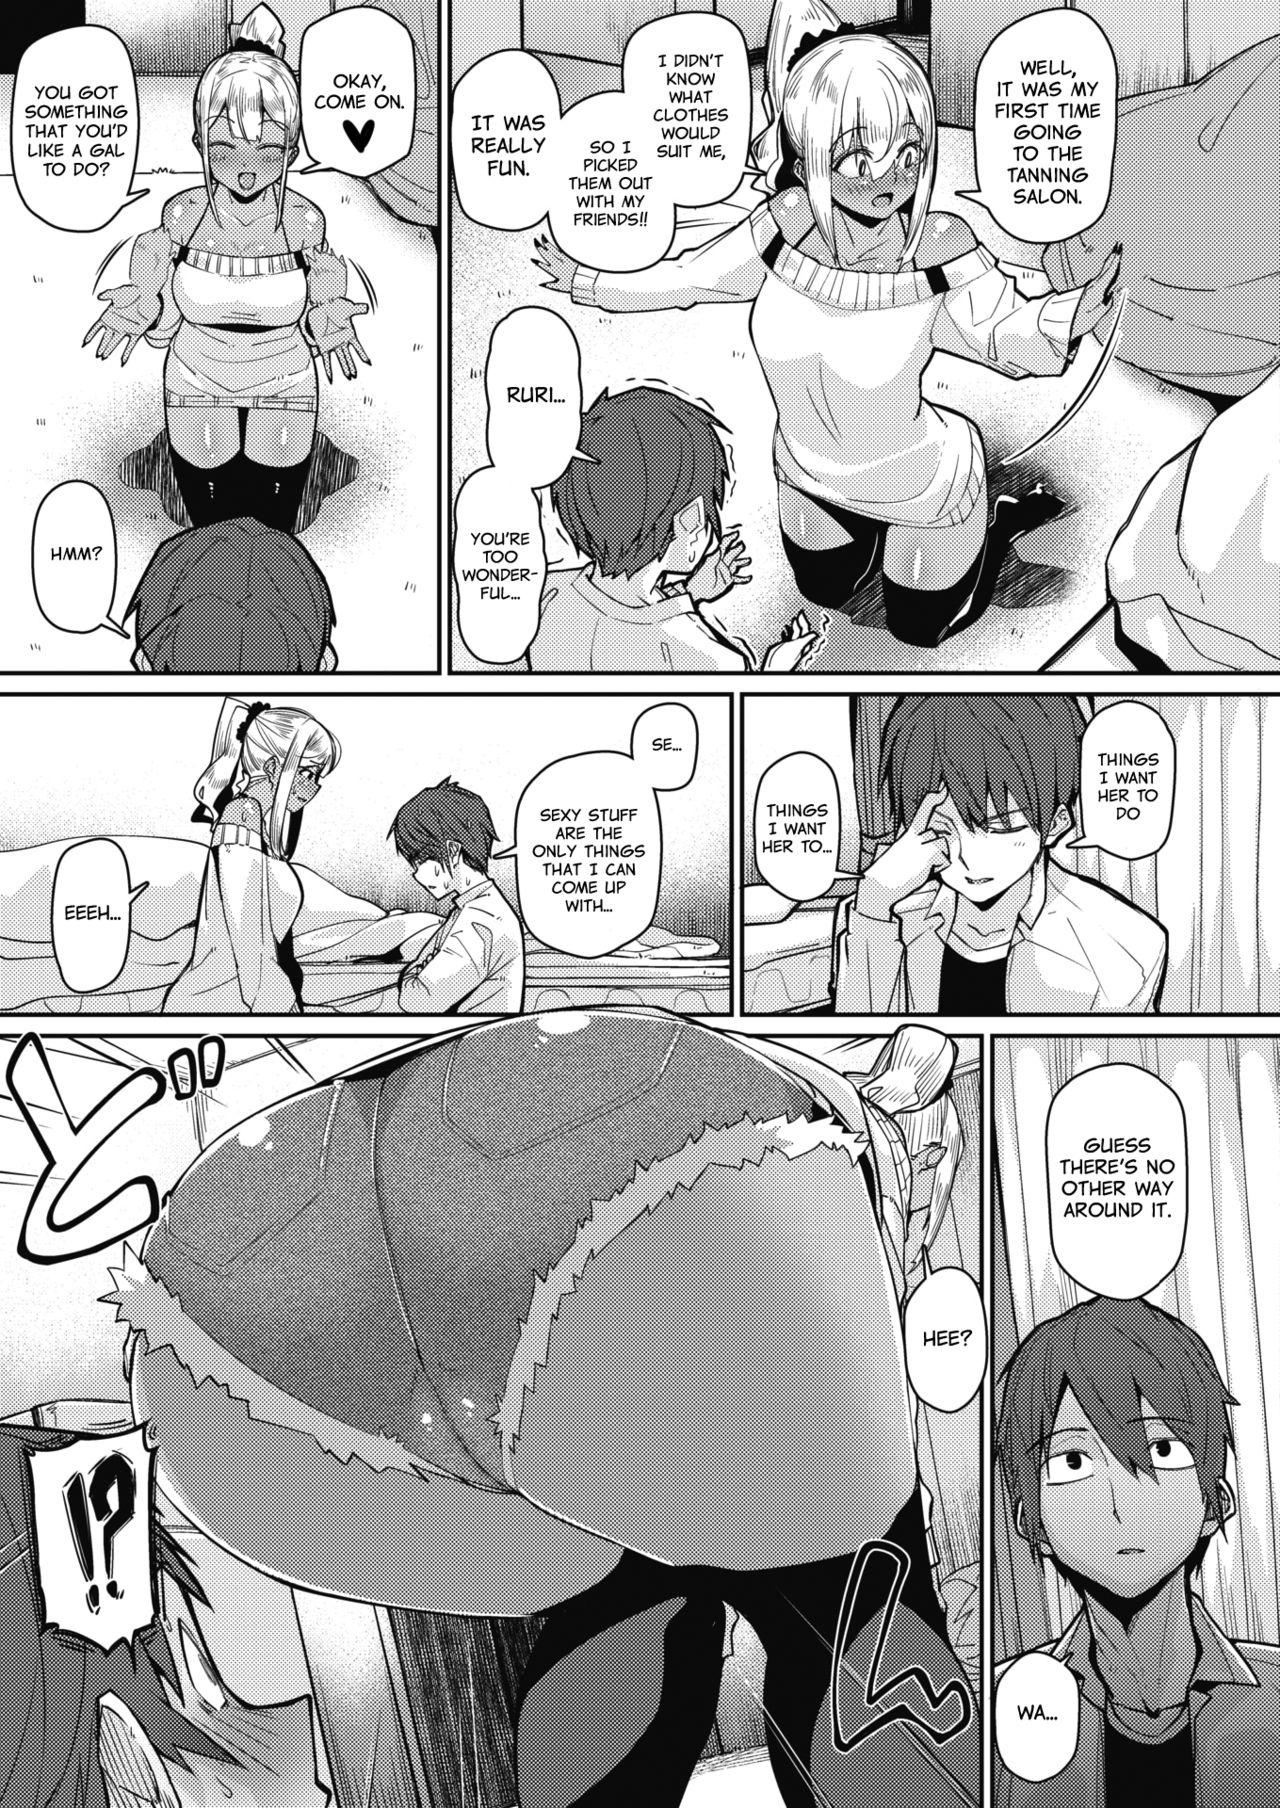 Adorable Gekkan "The Bitch" o Mita Onna no Hannou ni Tsuite | About the Reaction of the Girl Who Saw "The Bitch Monthly" Gay Medic - Page 5